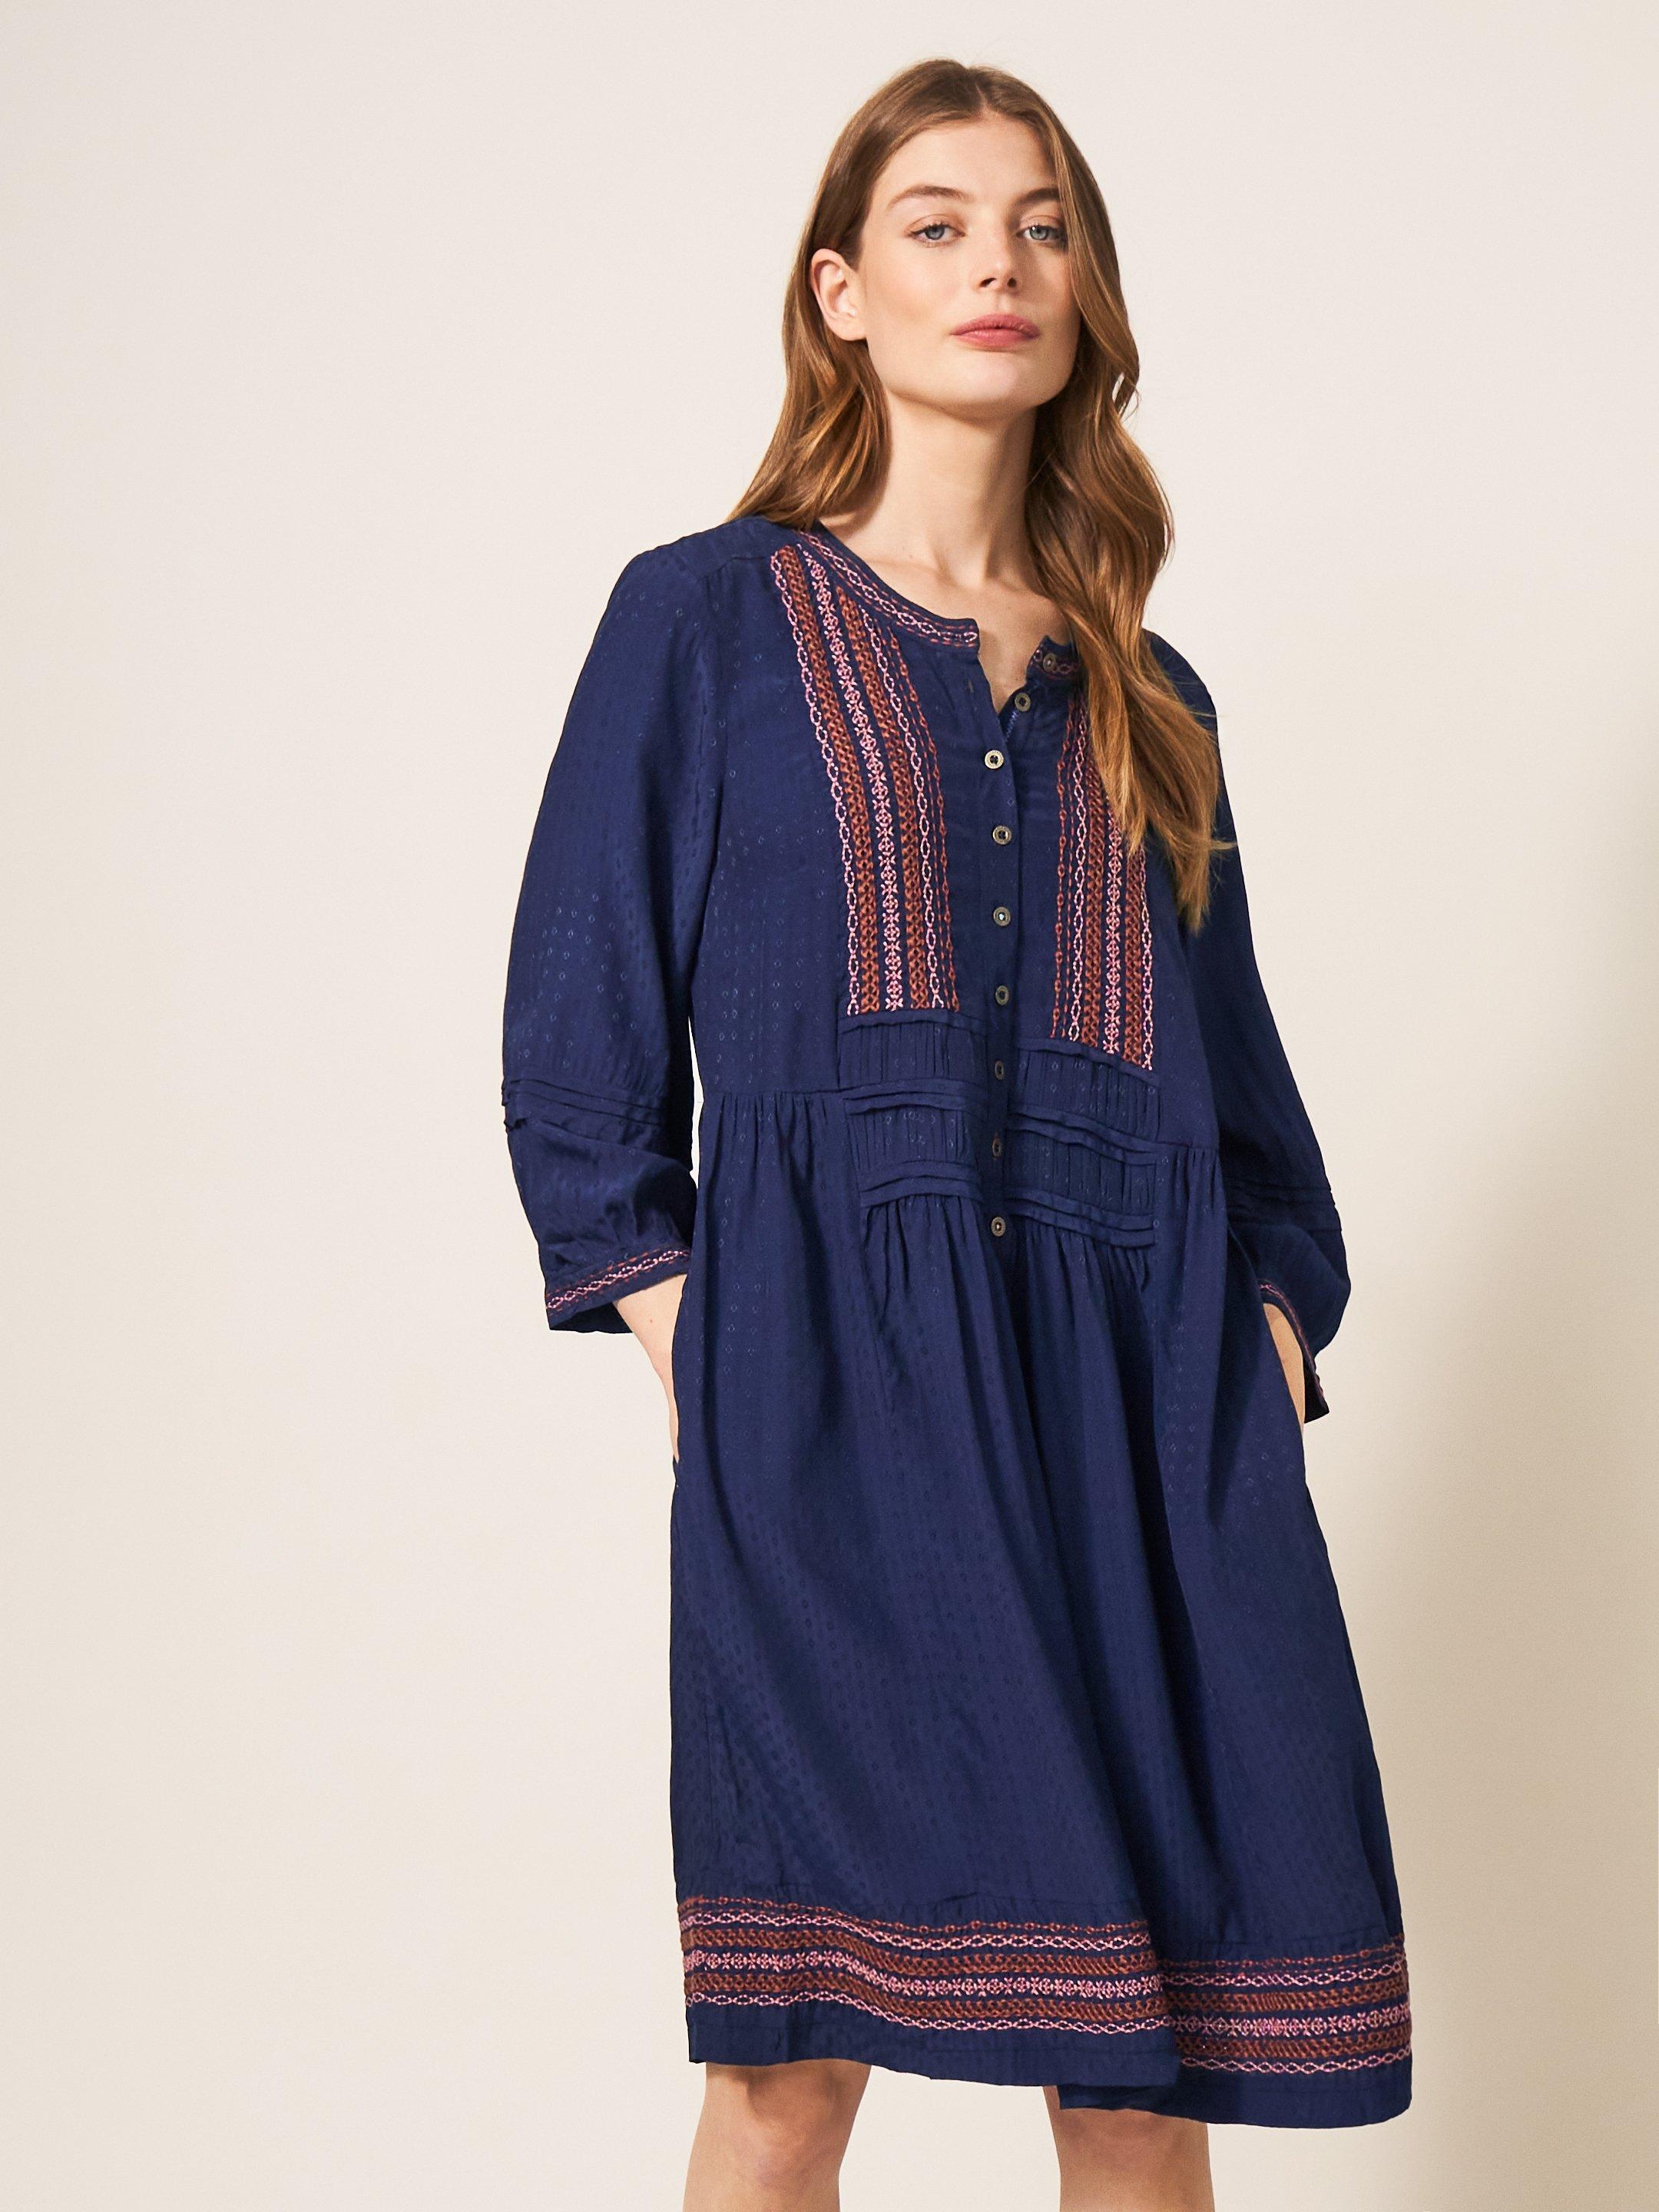 Liv Embroidered Dress in NAVY MULTI - LIFESTYLE